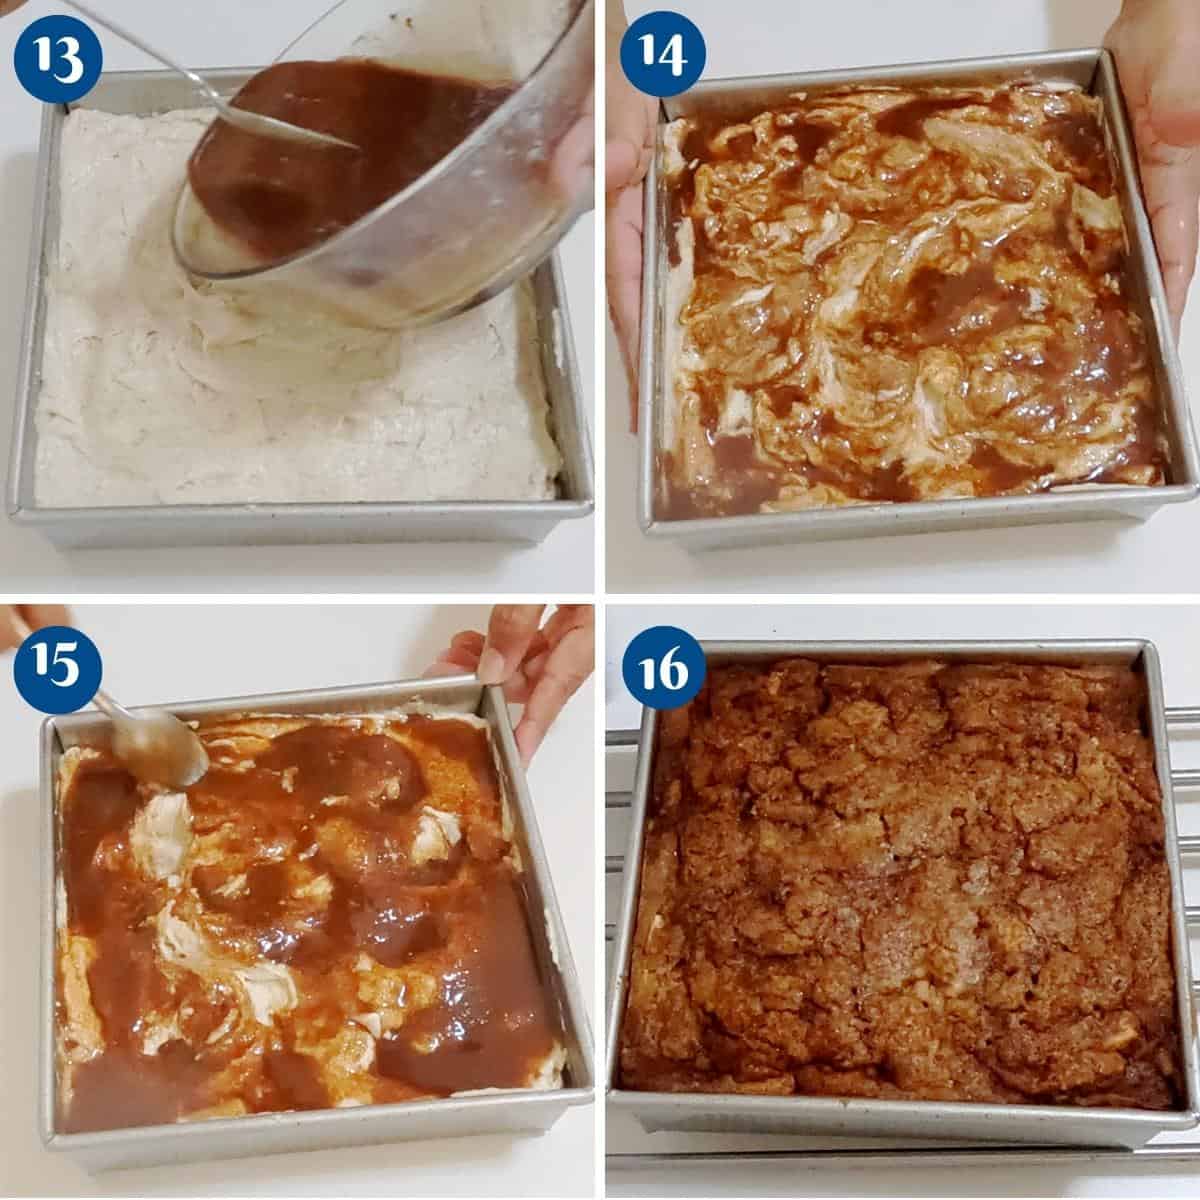 Progress pictures assembling apple cake with cinnamon.